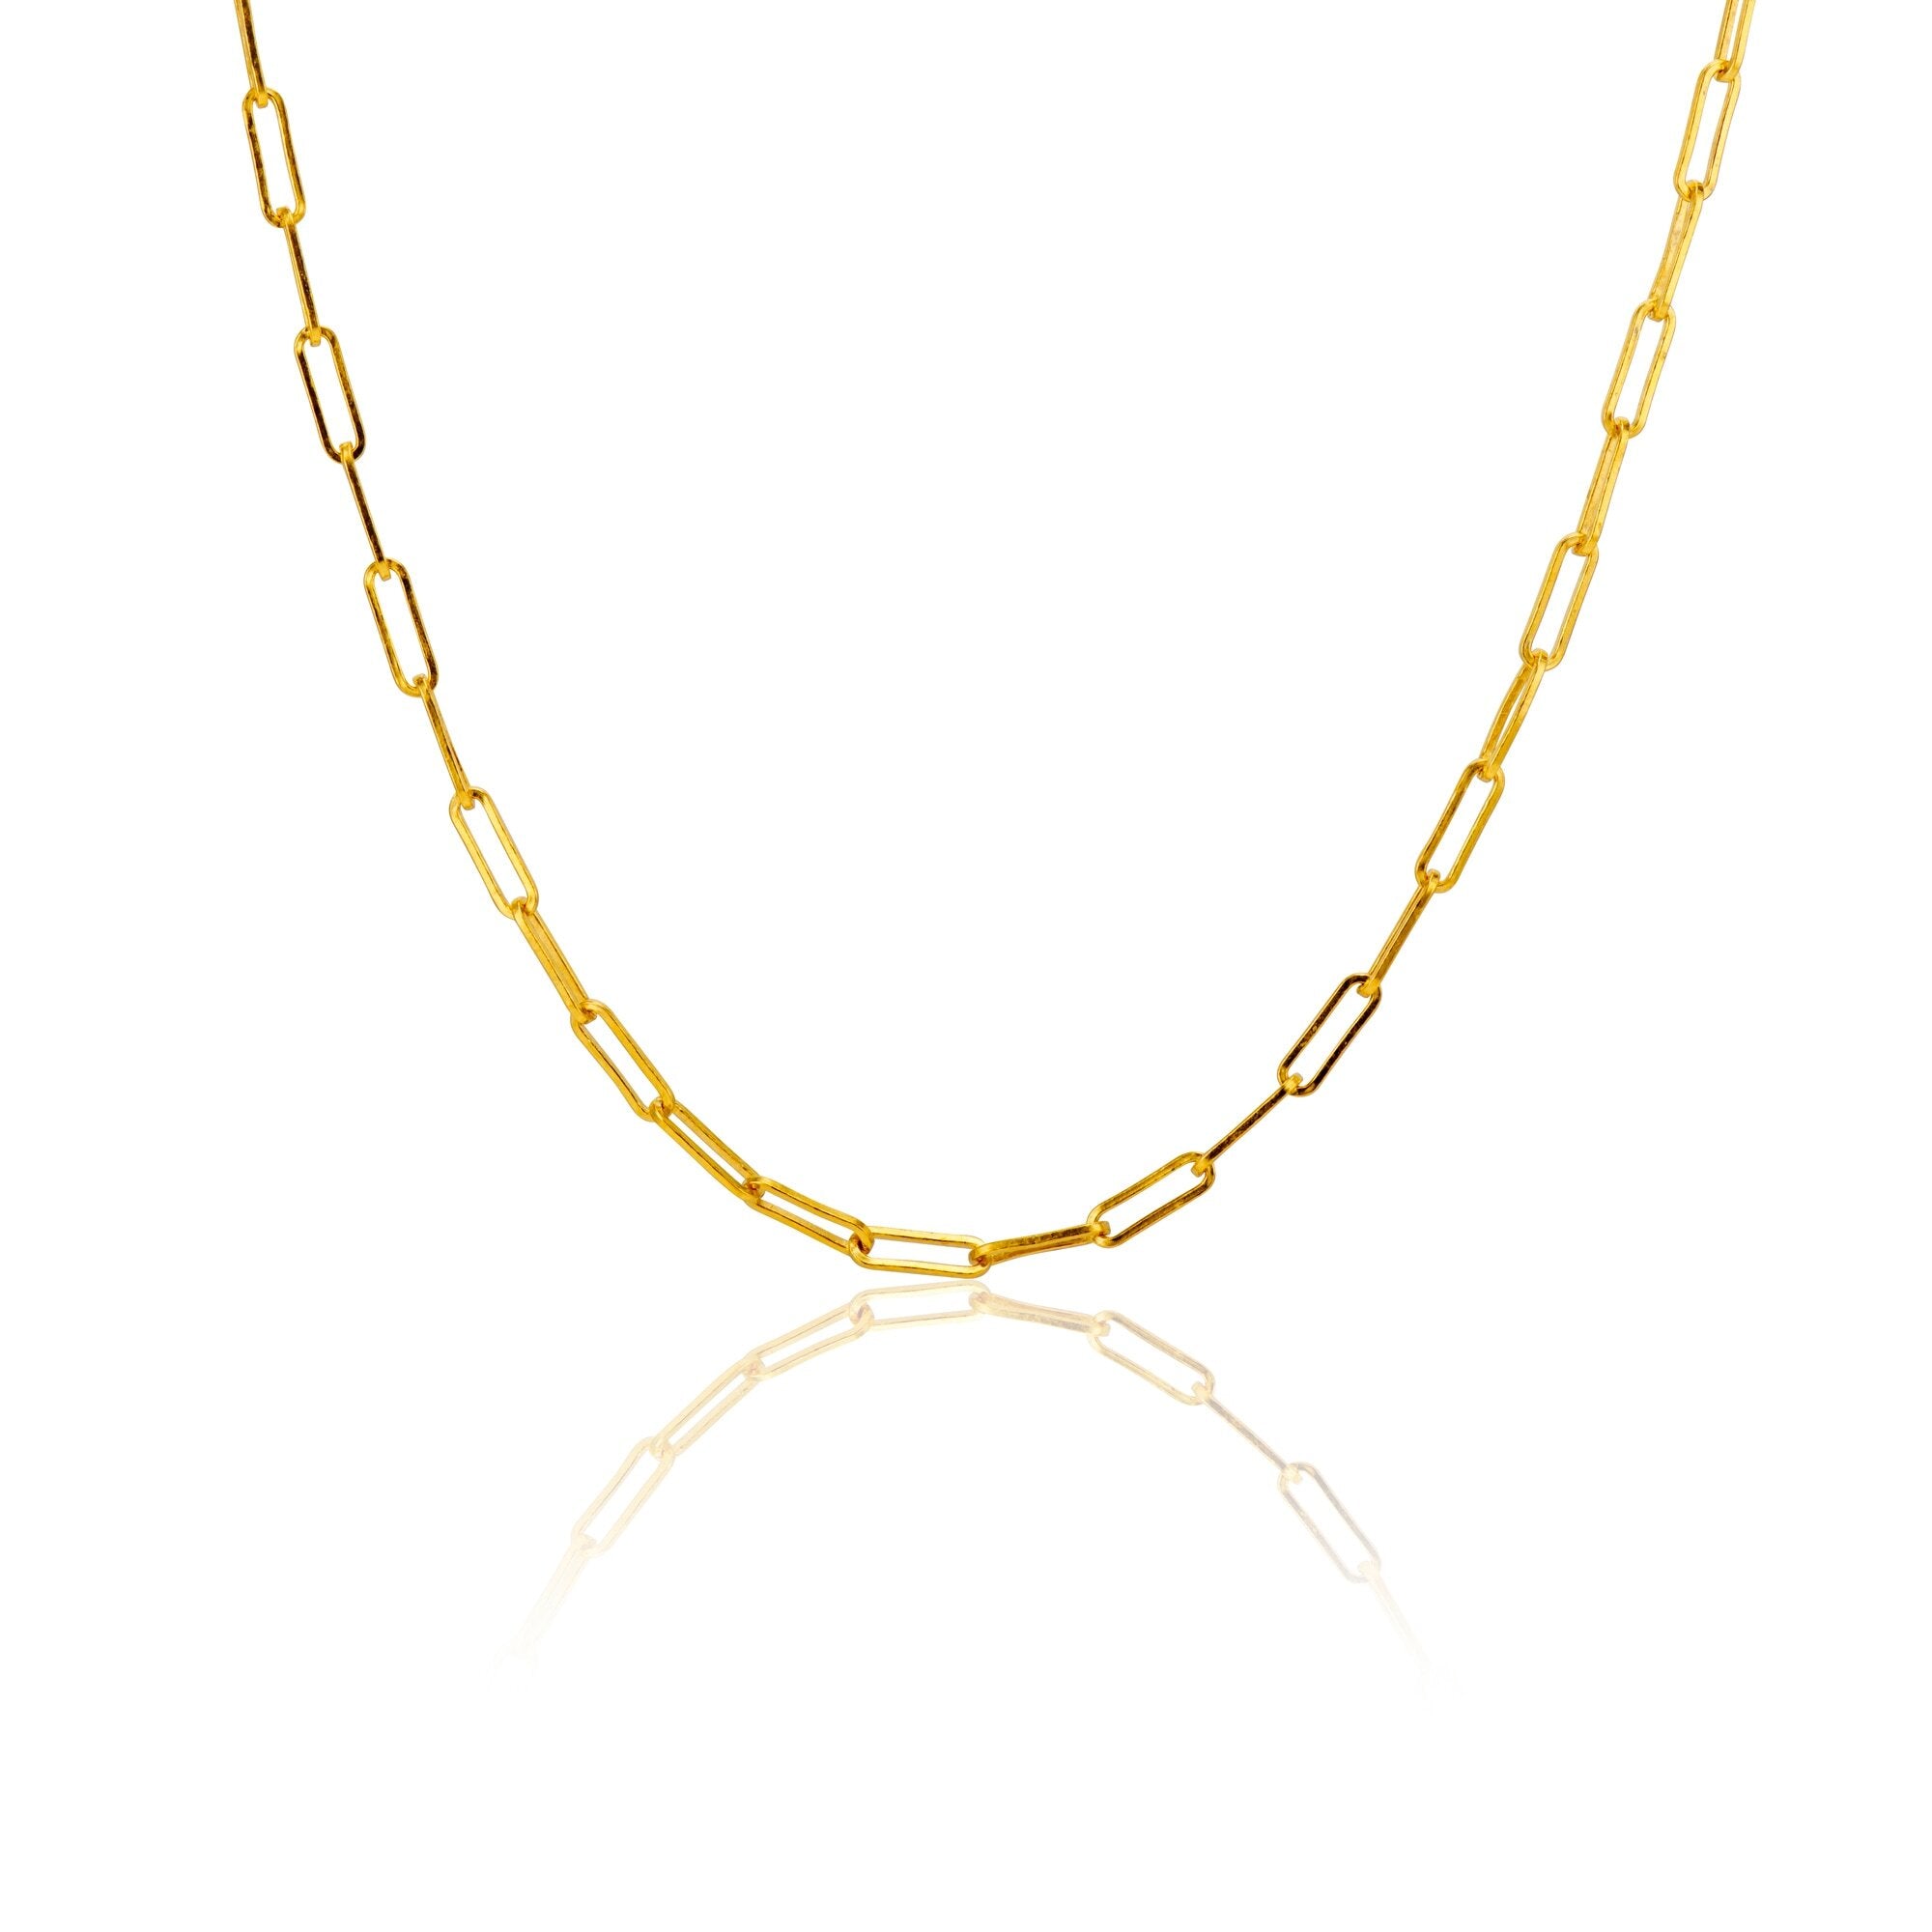 MAI Désirée Ricky Gold Paperclip Chain Set - Waterproof Jewelry